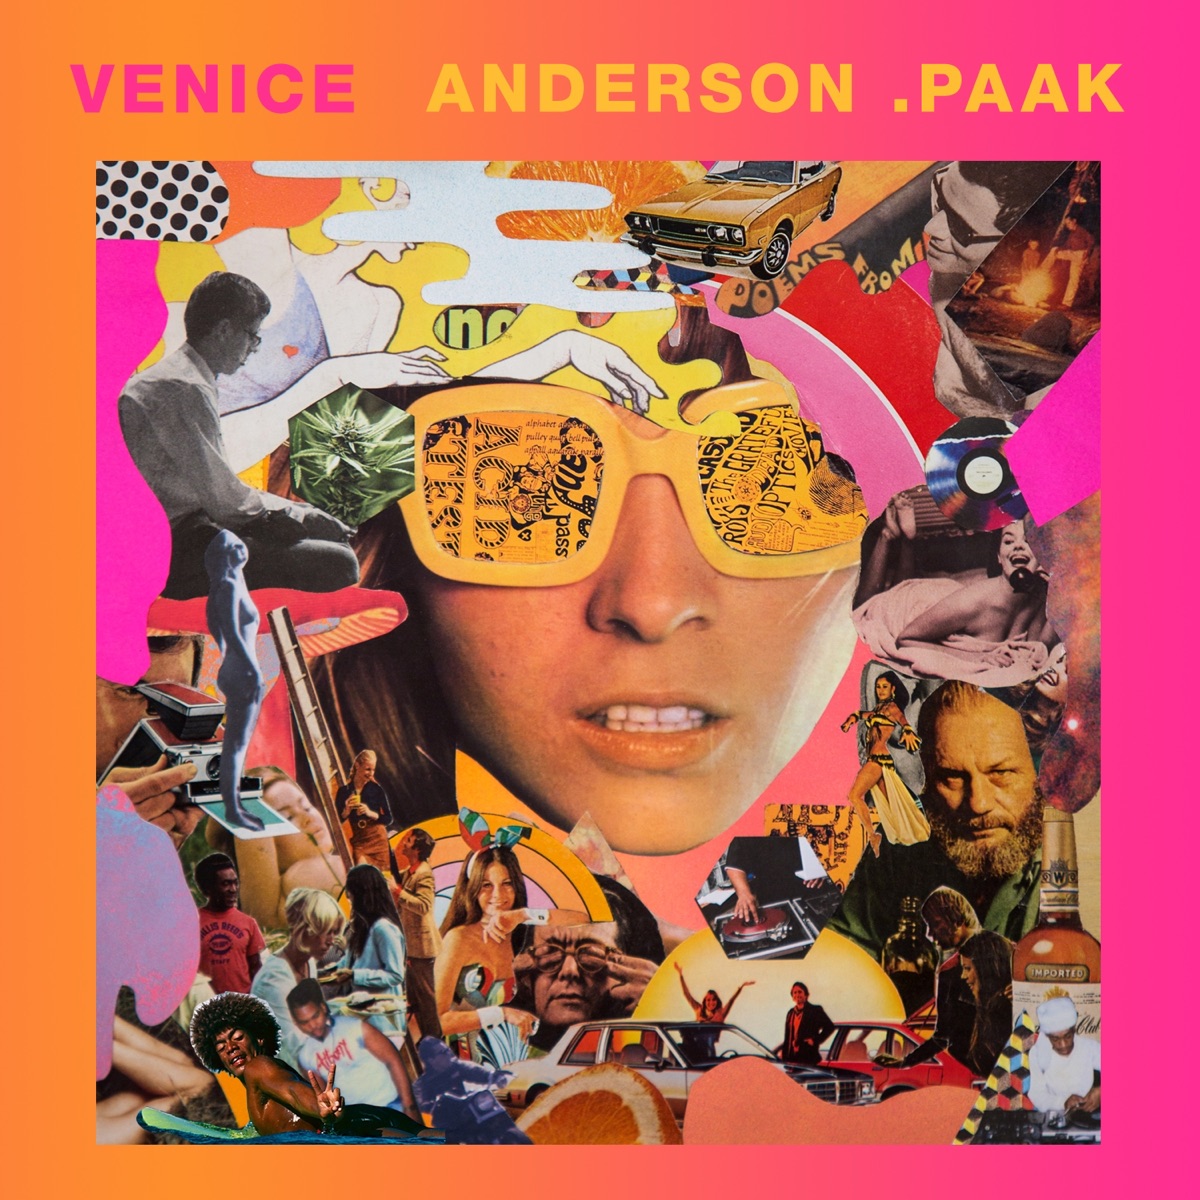 Mægtig ildsted køn ‎Venice by Anderson .Paak on Apple Music